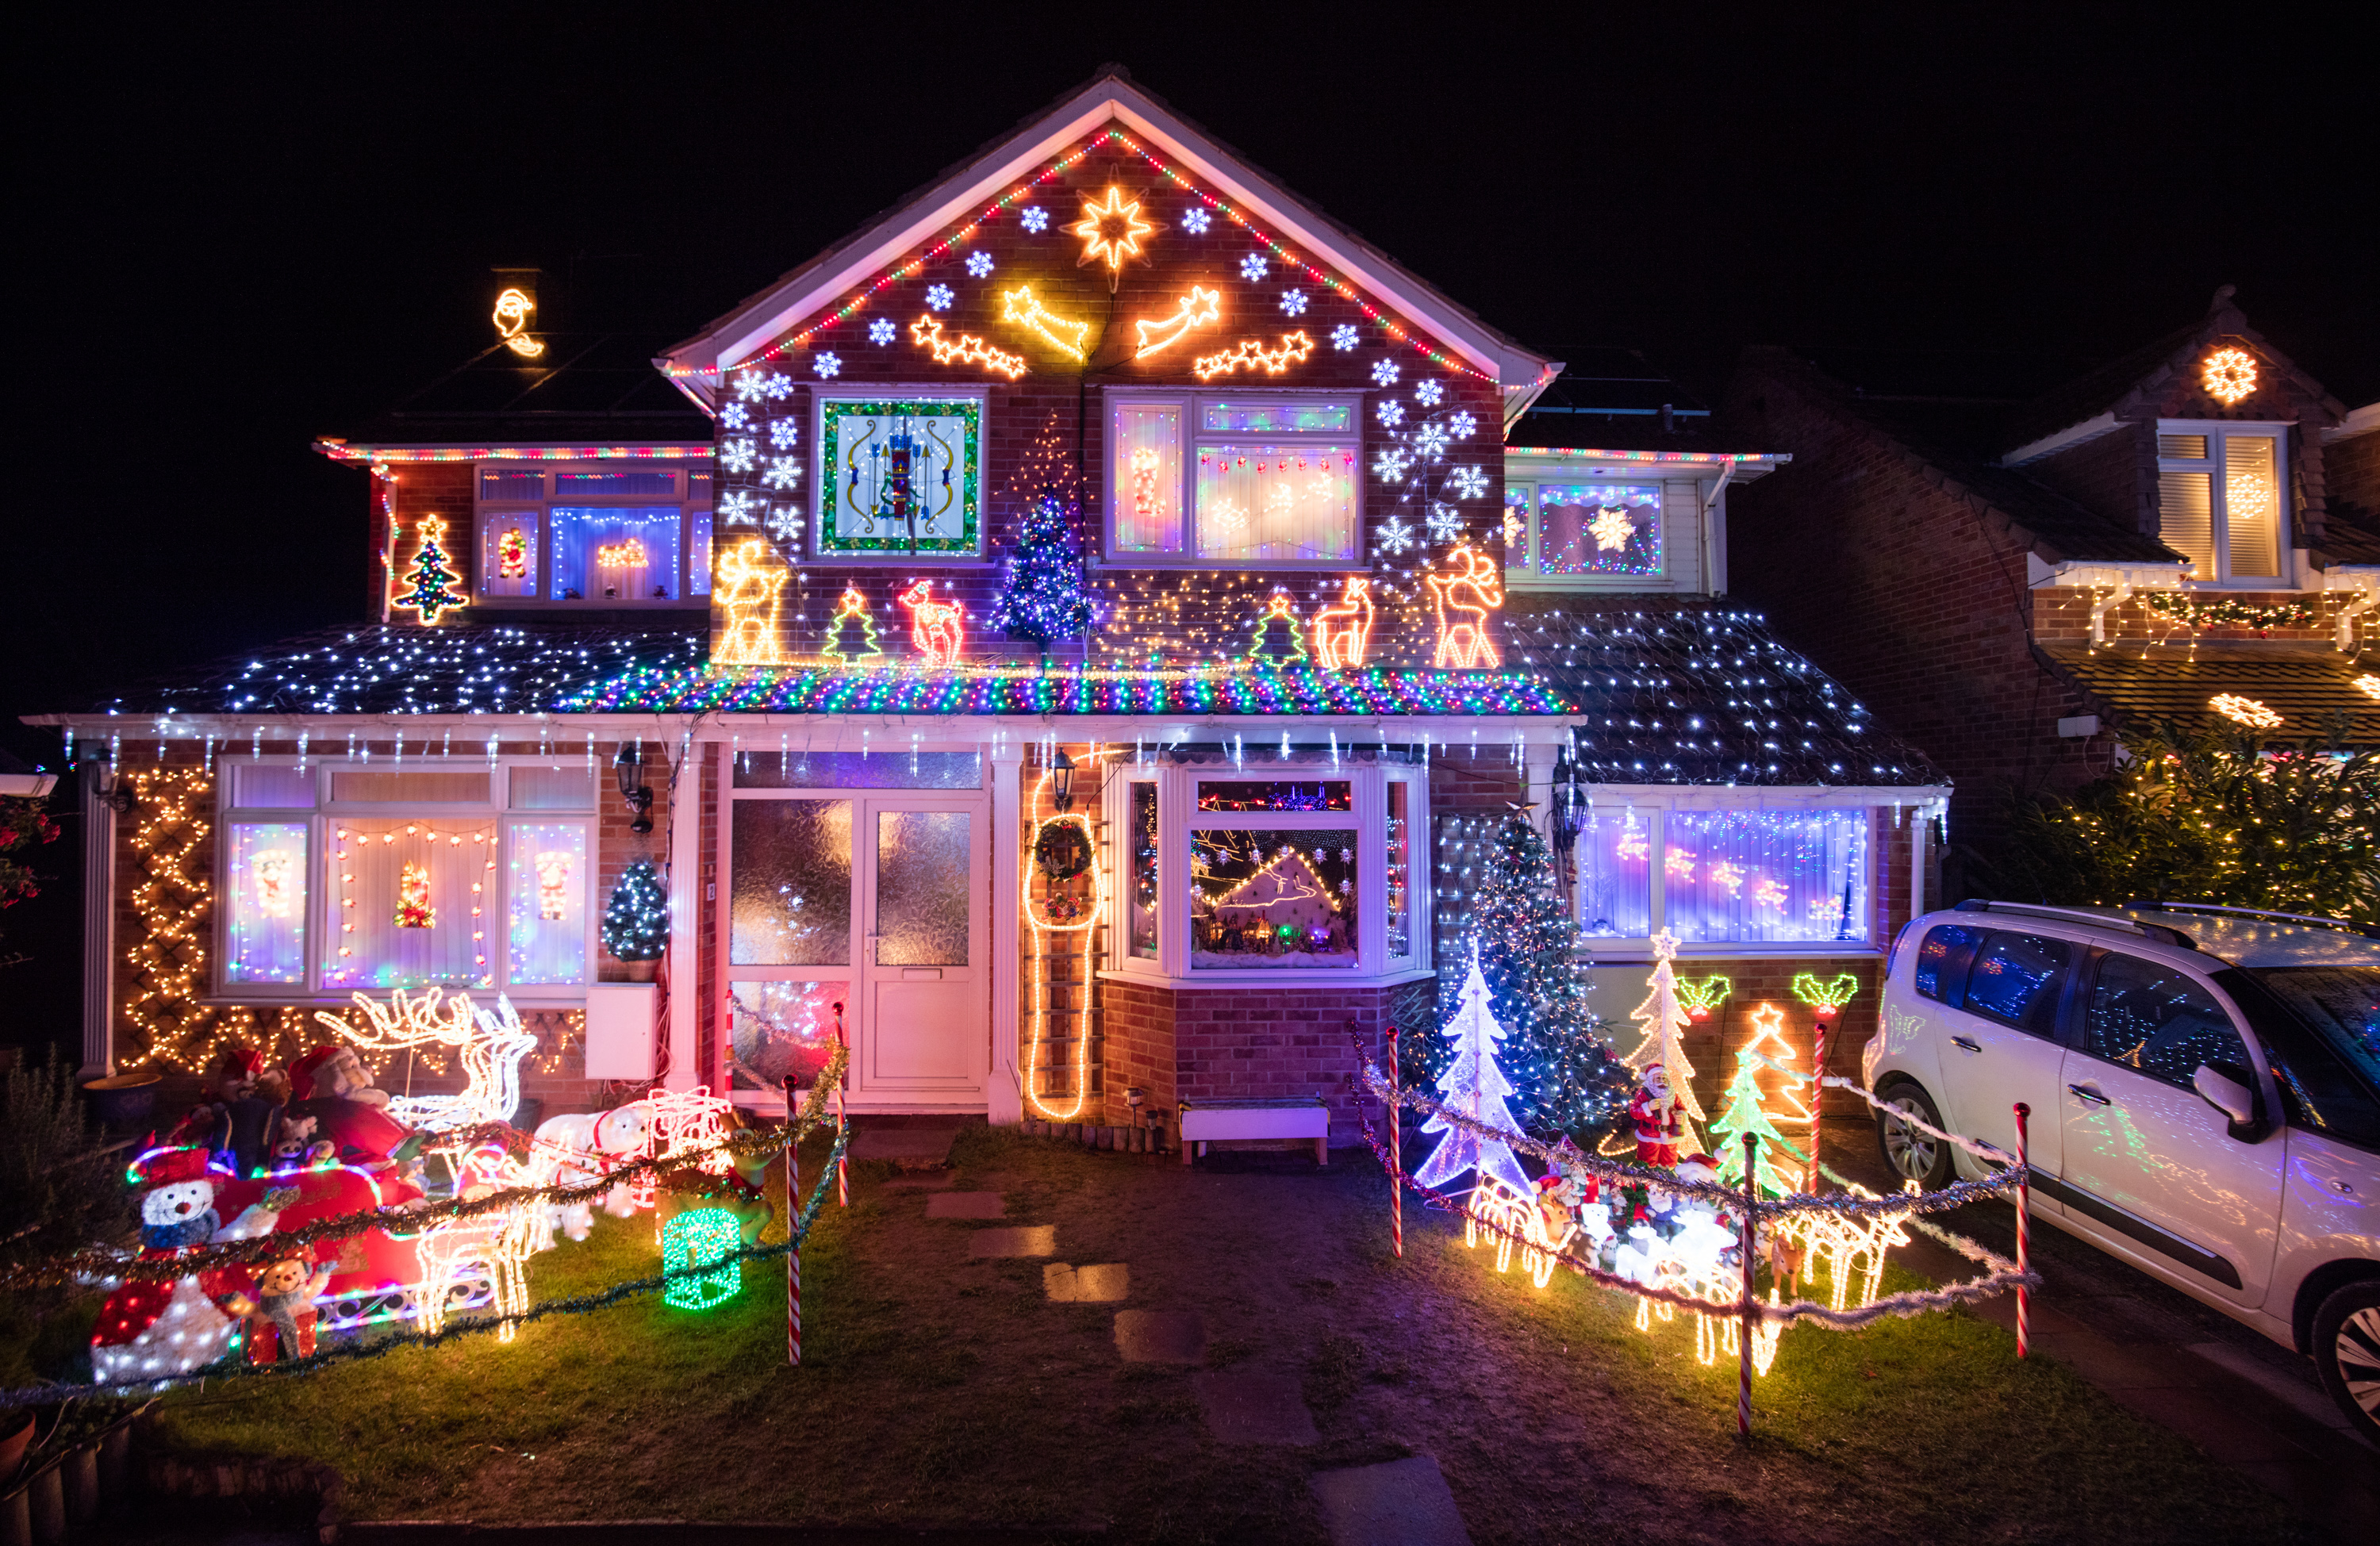 Most spectacular Christmas light displays in the Charlotte area – 2016